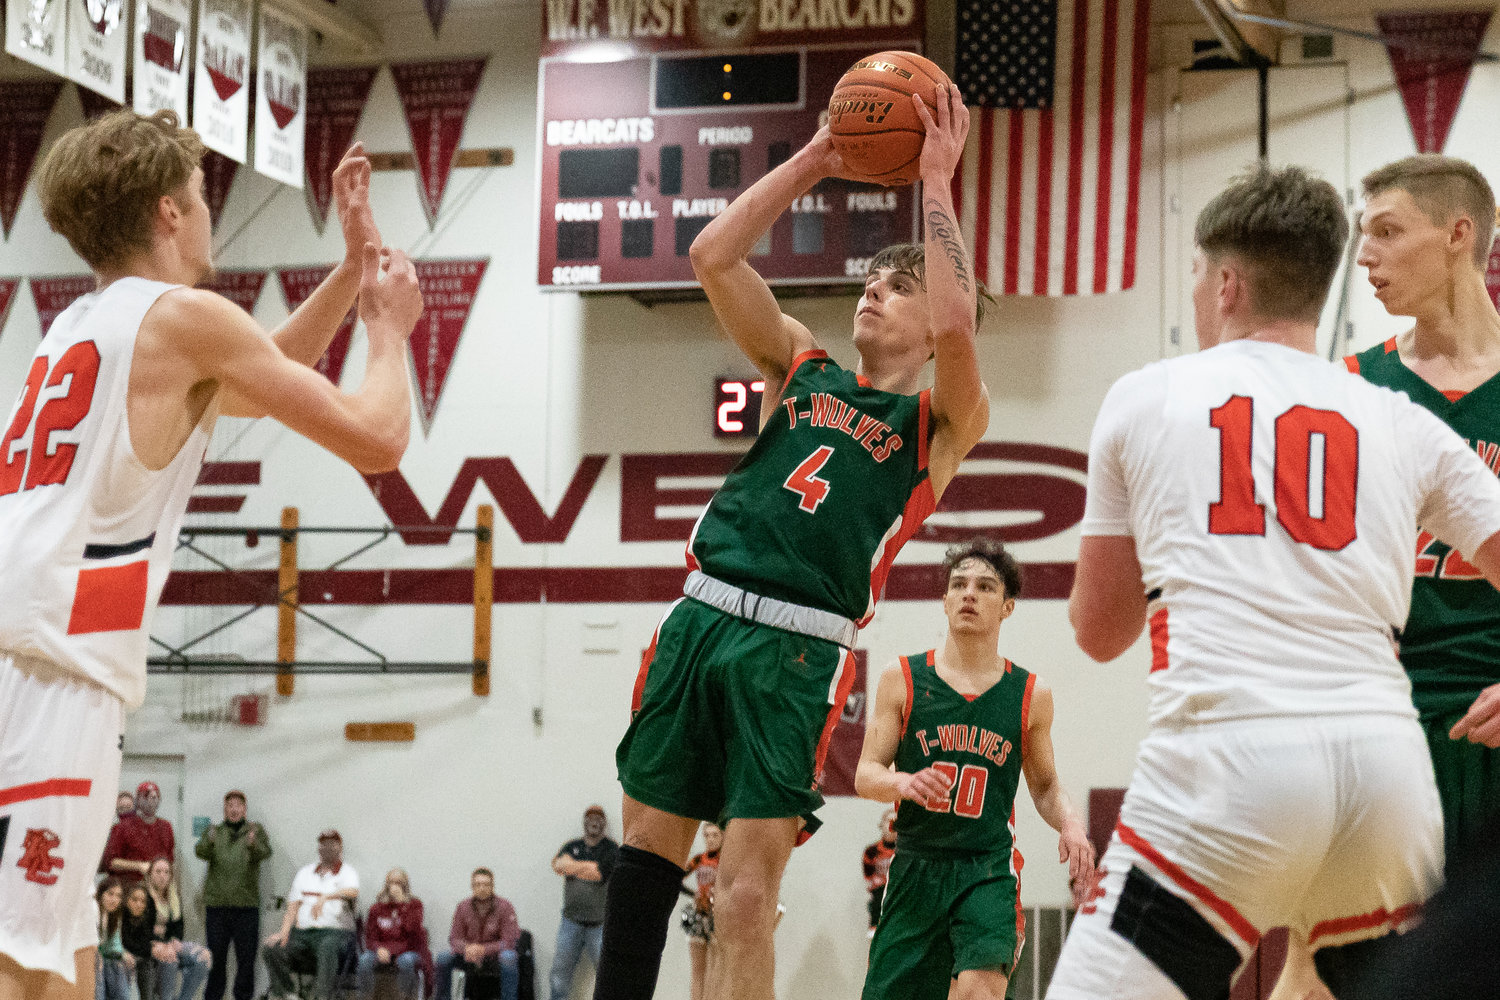 MWP guard Leytan Collette takes a jumpshot against Kalama in the 2B District IV Championship at W.F. West Feb. 19.